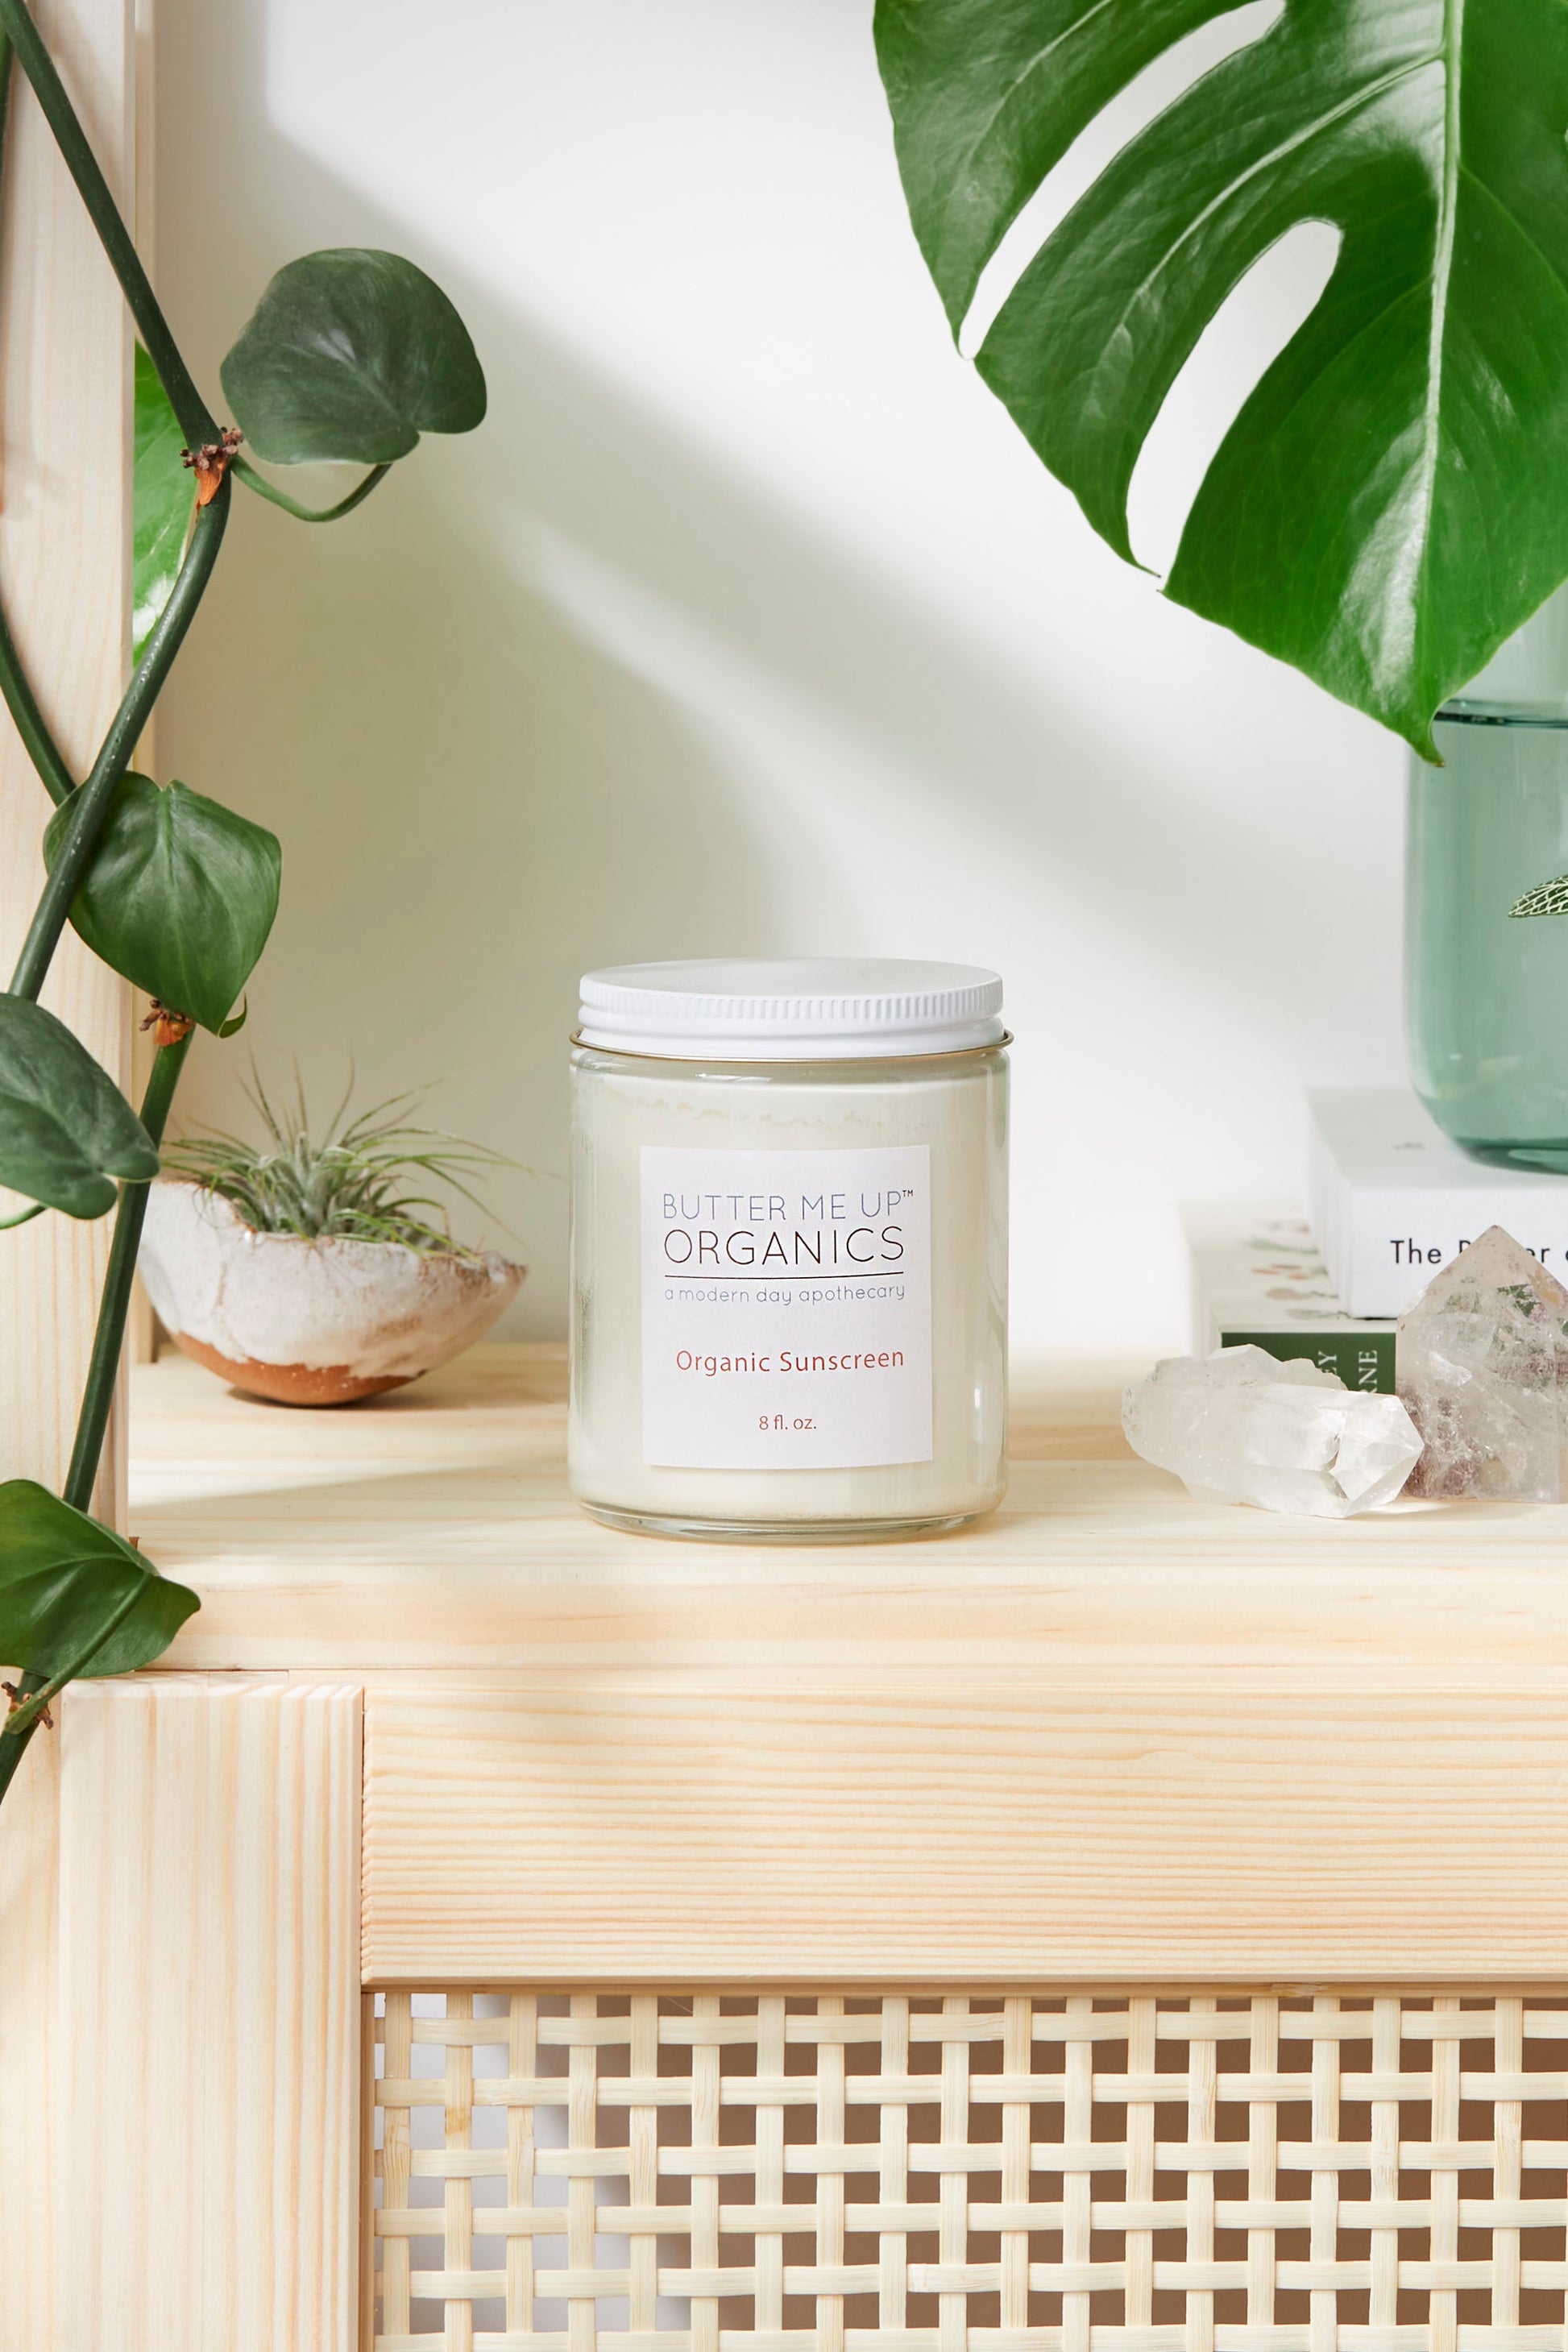 A Natural Organic Sunscreen by White Smokey sits on a wooden shelf next to a candle.